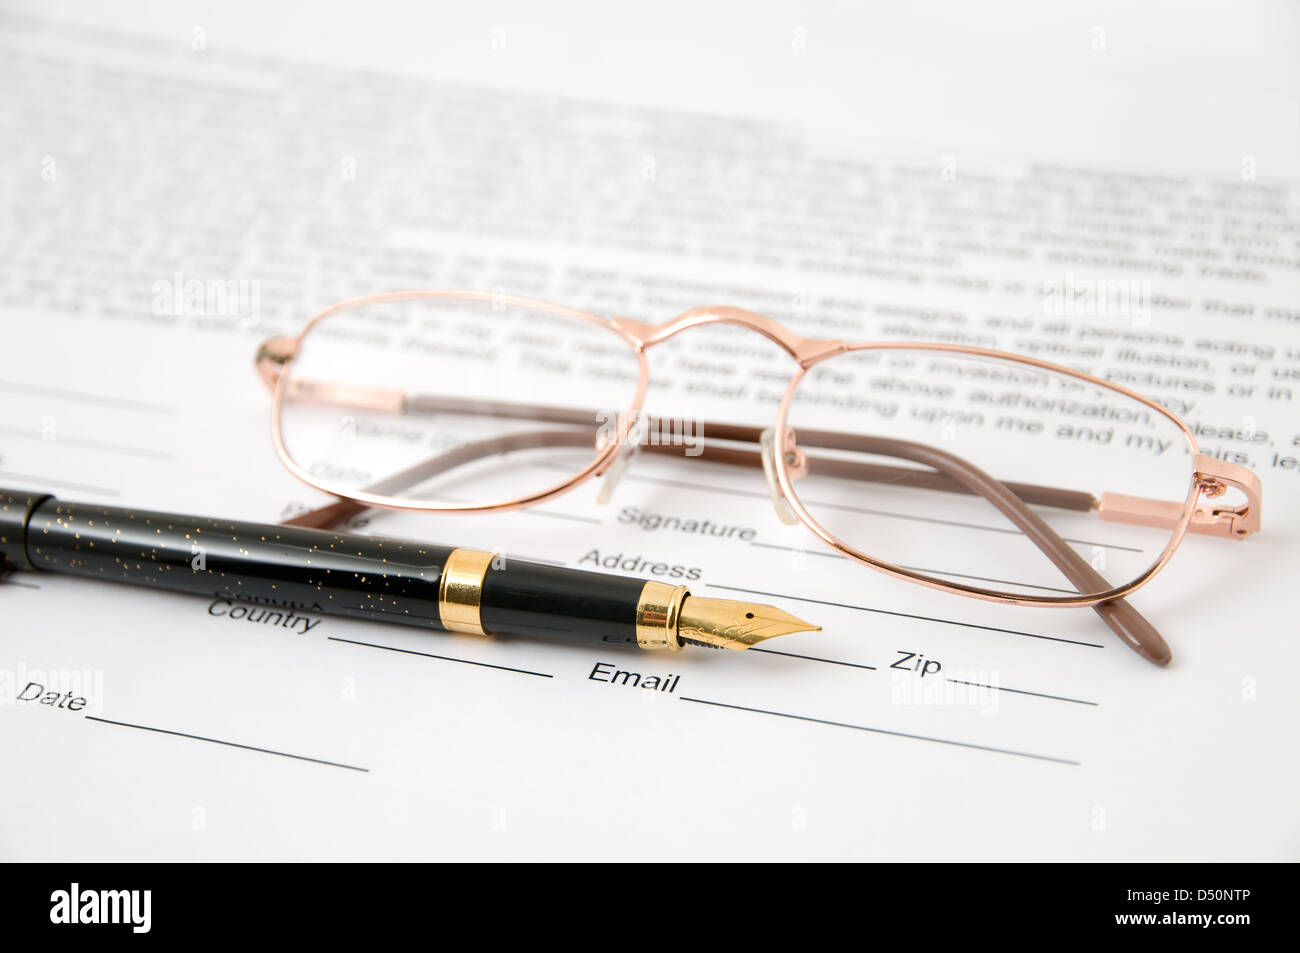 Eyeglasses and pen lay on the document Stock Photo